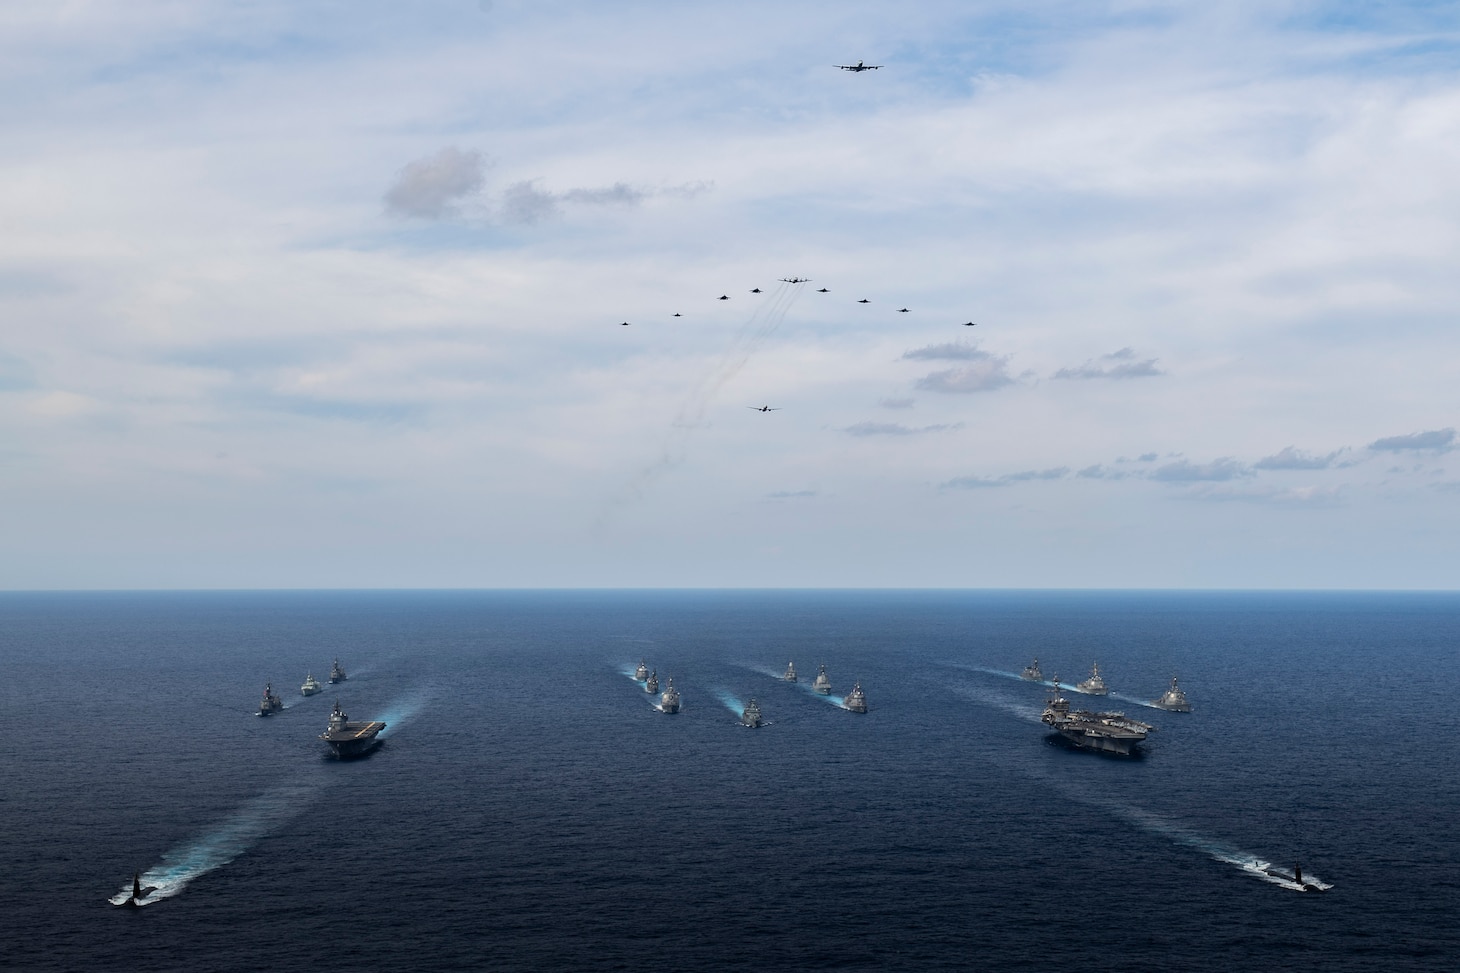 Eleven aircraft fly over 17 ships from the Royal Australian Navy, Royal Canadian Navy, German Navy, Japan Maritime Self-Defense Force (JMSDF) and U.S. Navy as they sail in formation during Annual Exercise (ANNUALEX), Nov. 21. ANNUALEX 2021 is a multilateral exercise conducted by elements of the Royal Australian, Royal Canadian, German, JMSDF and U.S. navies to demonstrate naval inoperability and a joint commitment to a free, open and inclusive Indo-Pacific.